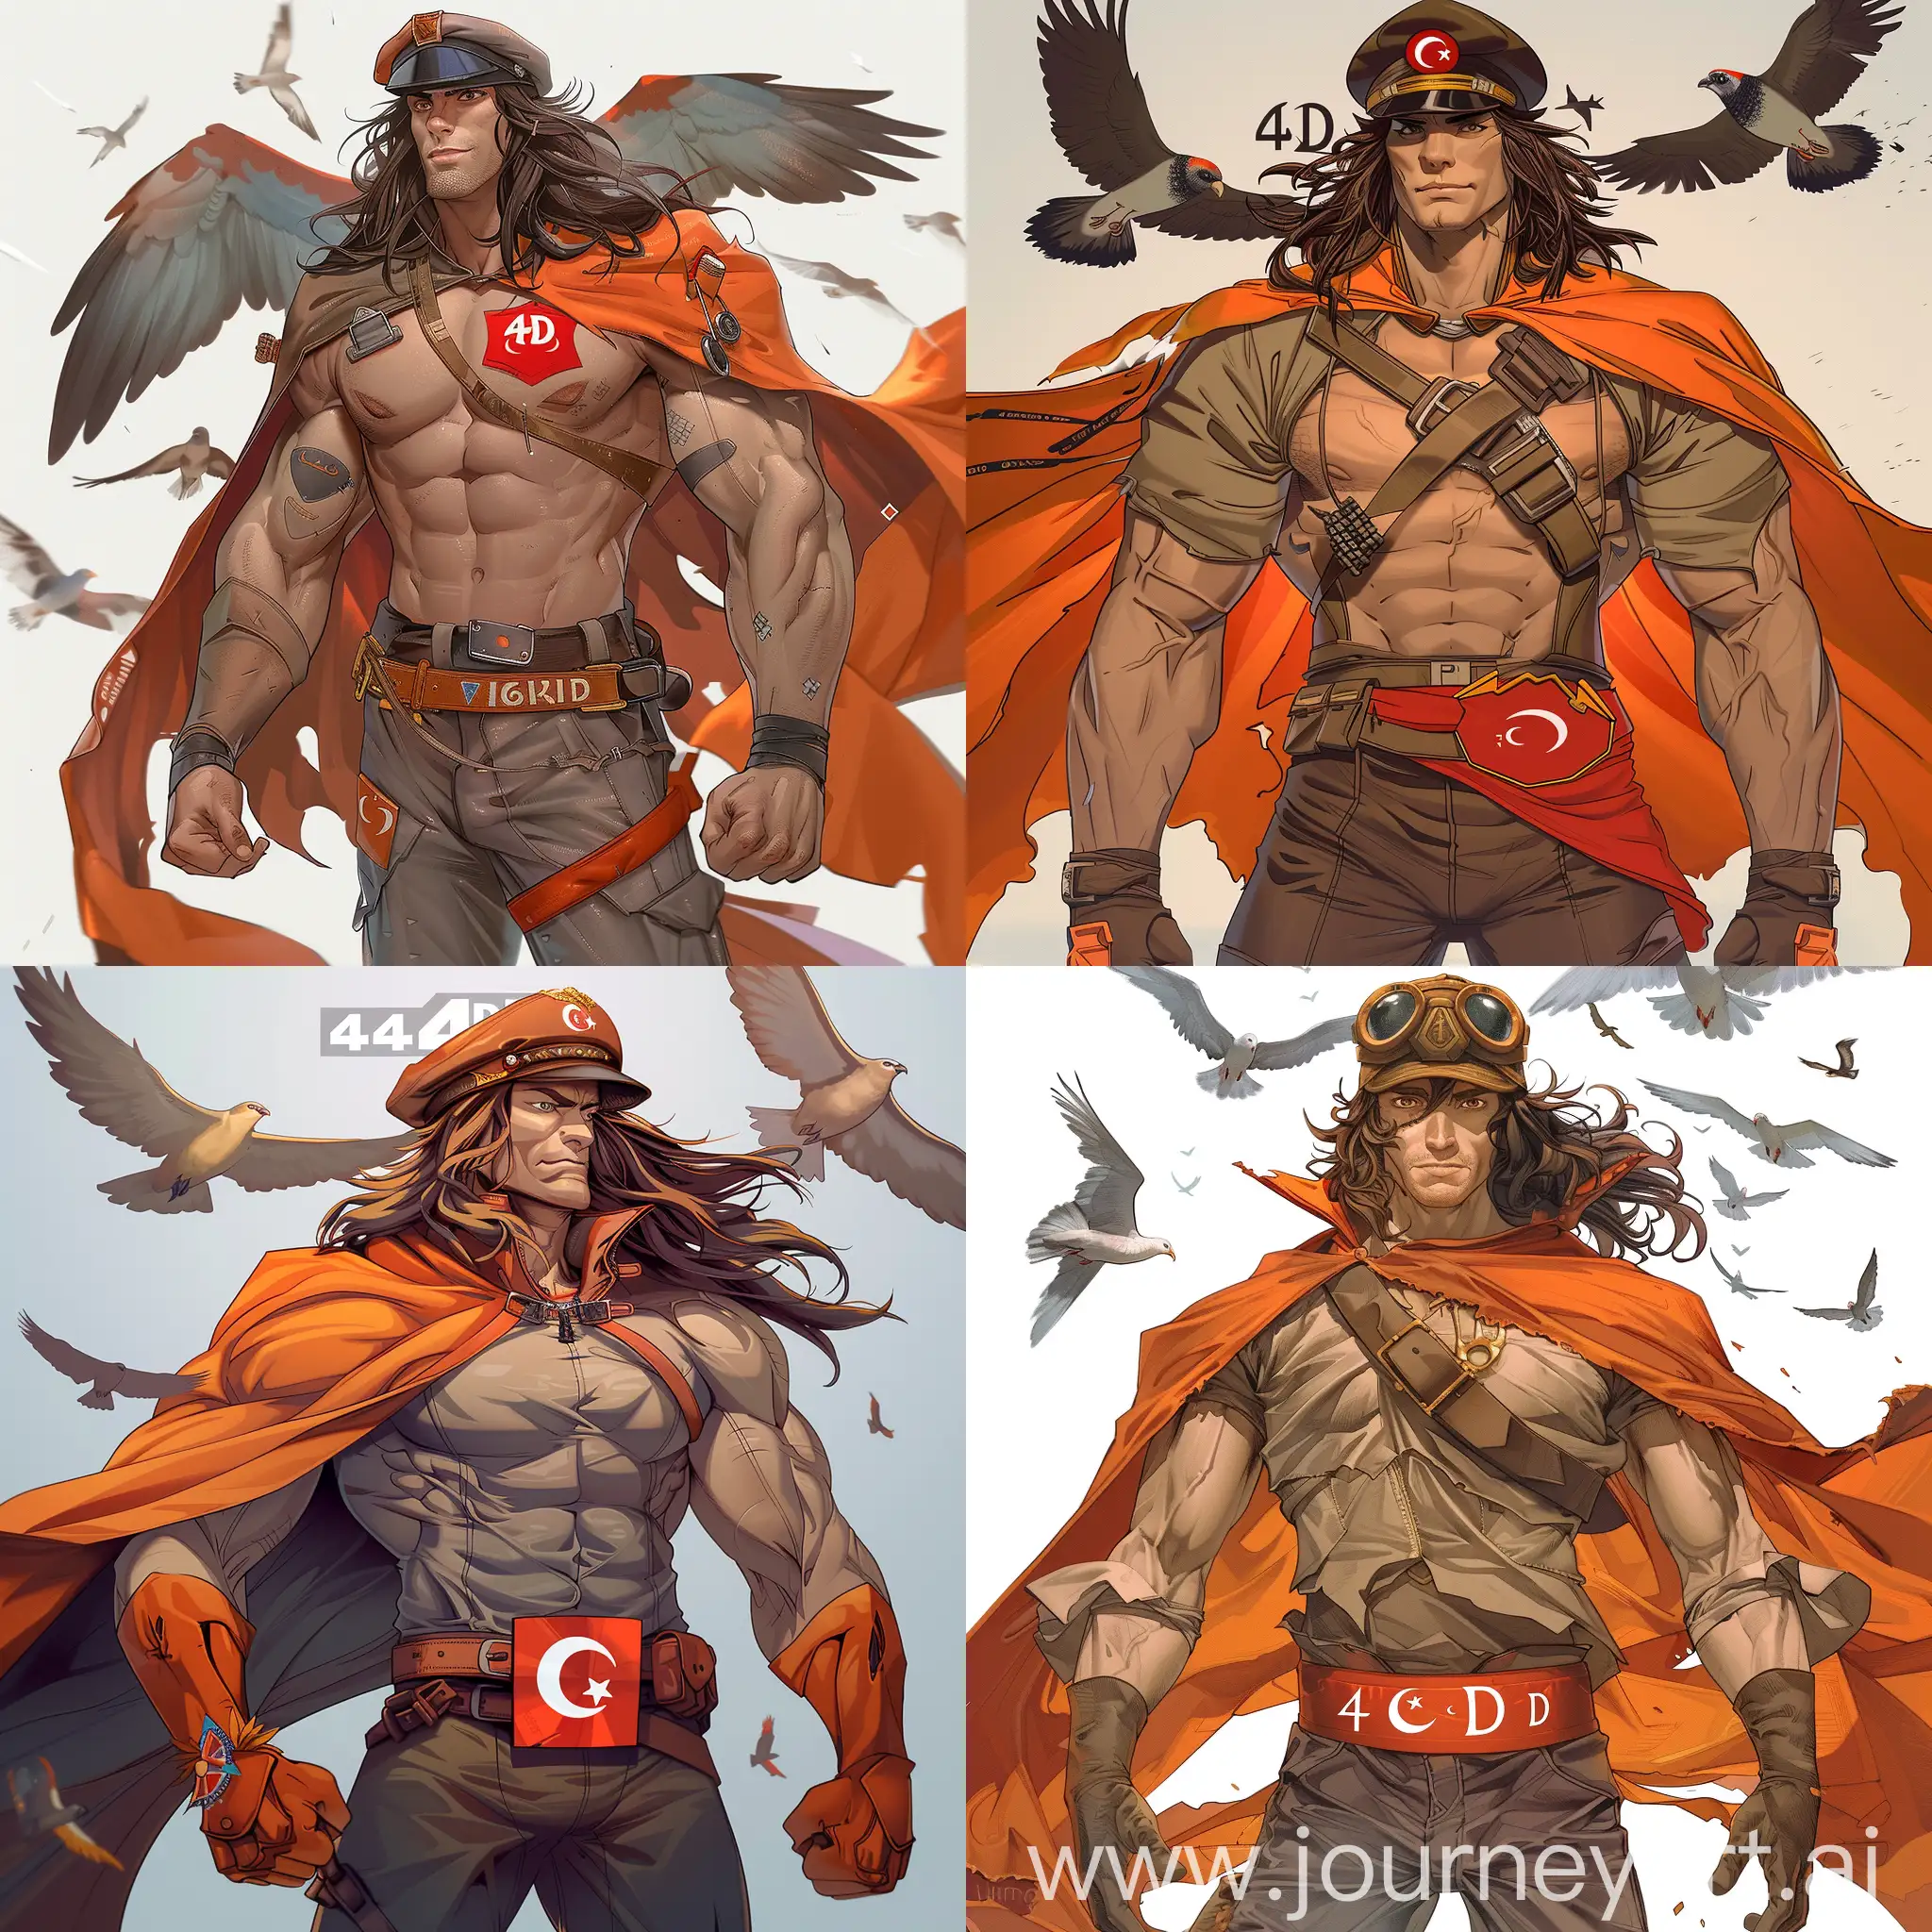 Draw a character. This character is male. He is muscular and has long hair. He has a pilot's hat on his head. Costume colors are orange-gray-brown bottom. Belt is dark orange. Red cape. 4D written on it. He has a Turkish flag coat of arms. He flies with the birds. He has brown eyes.